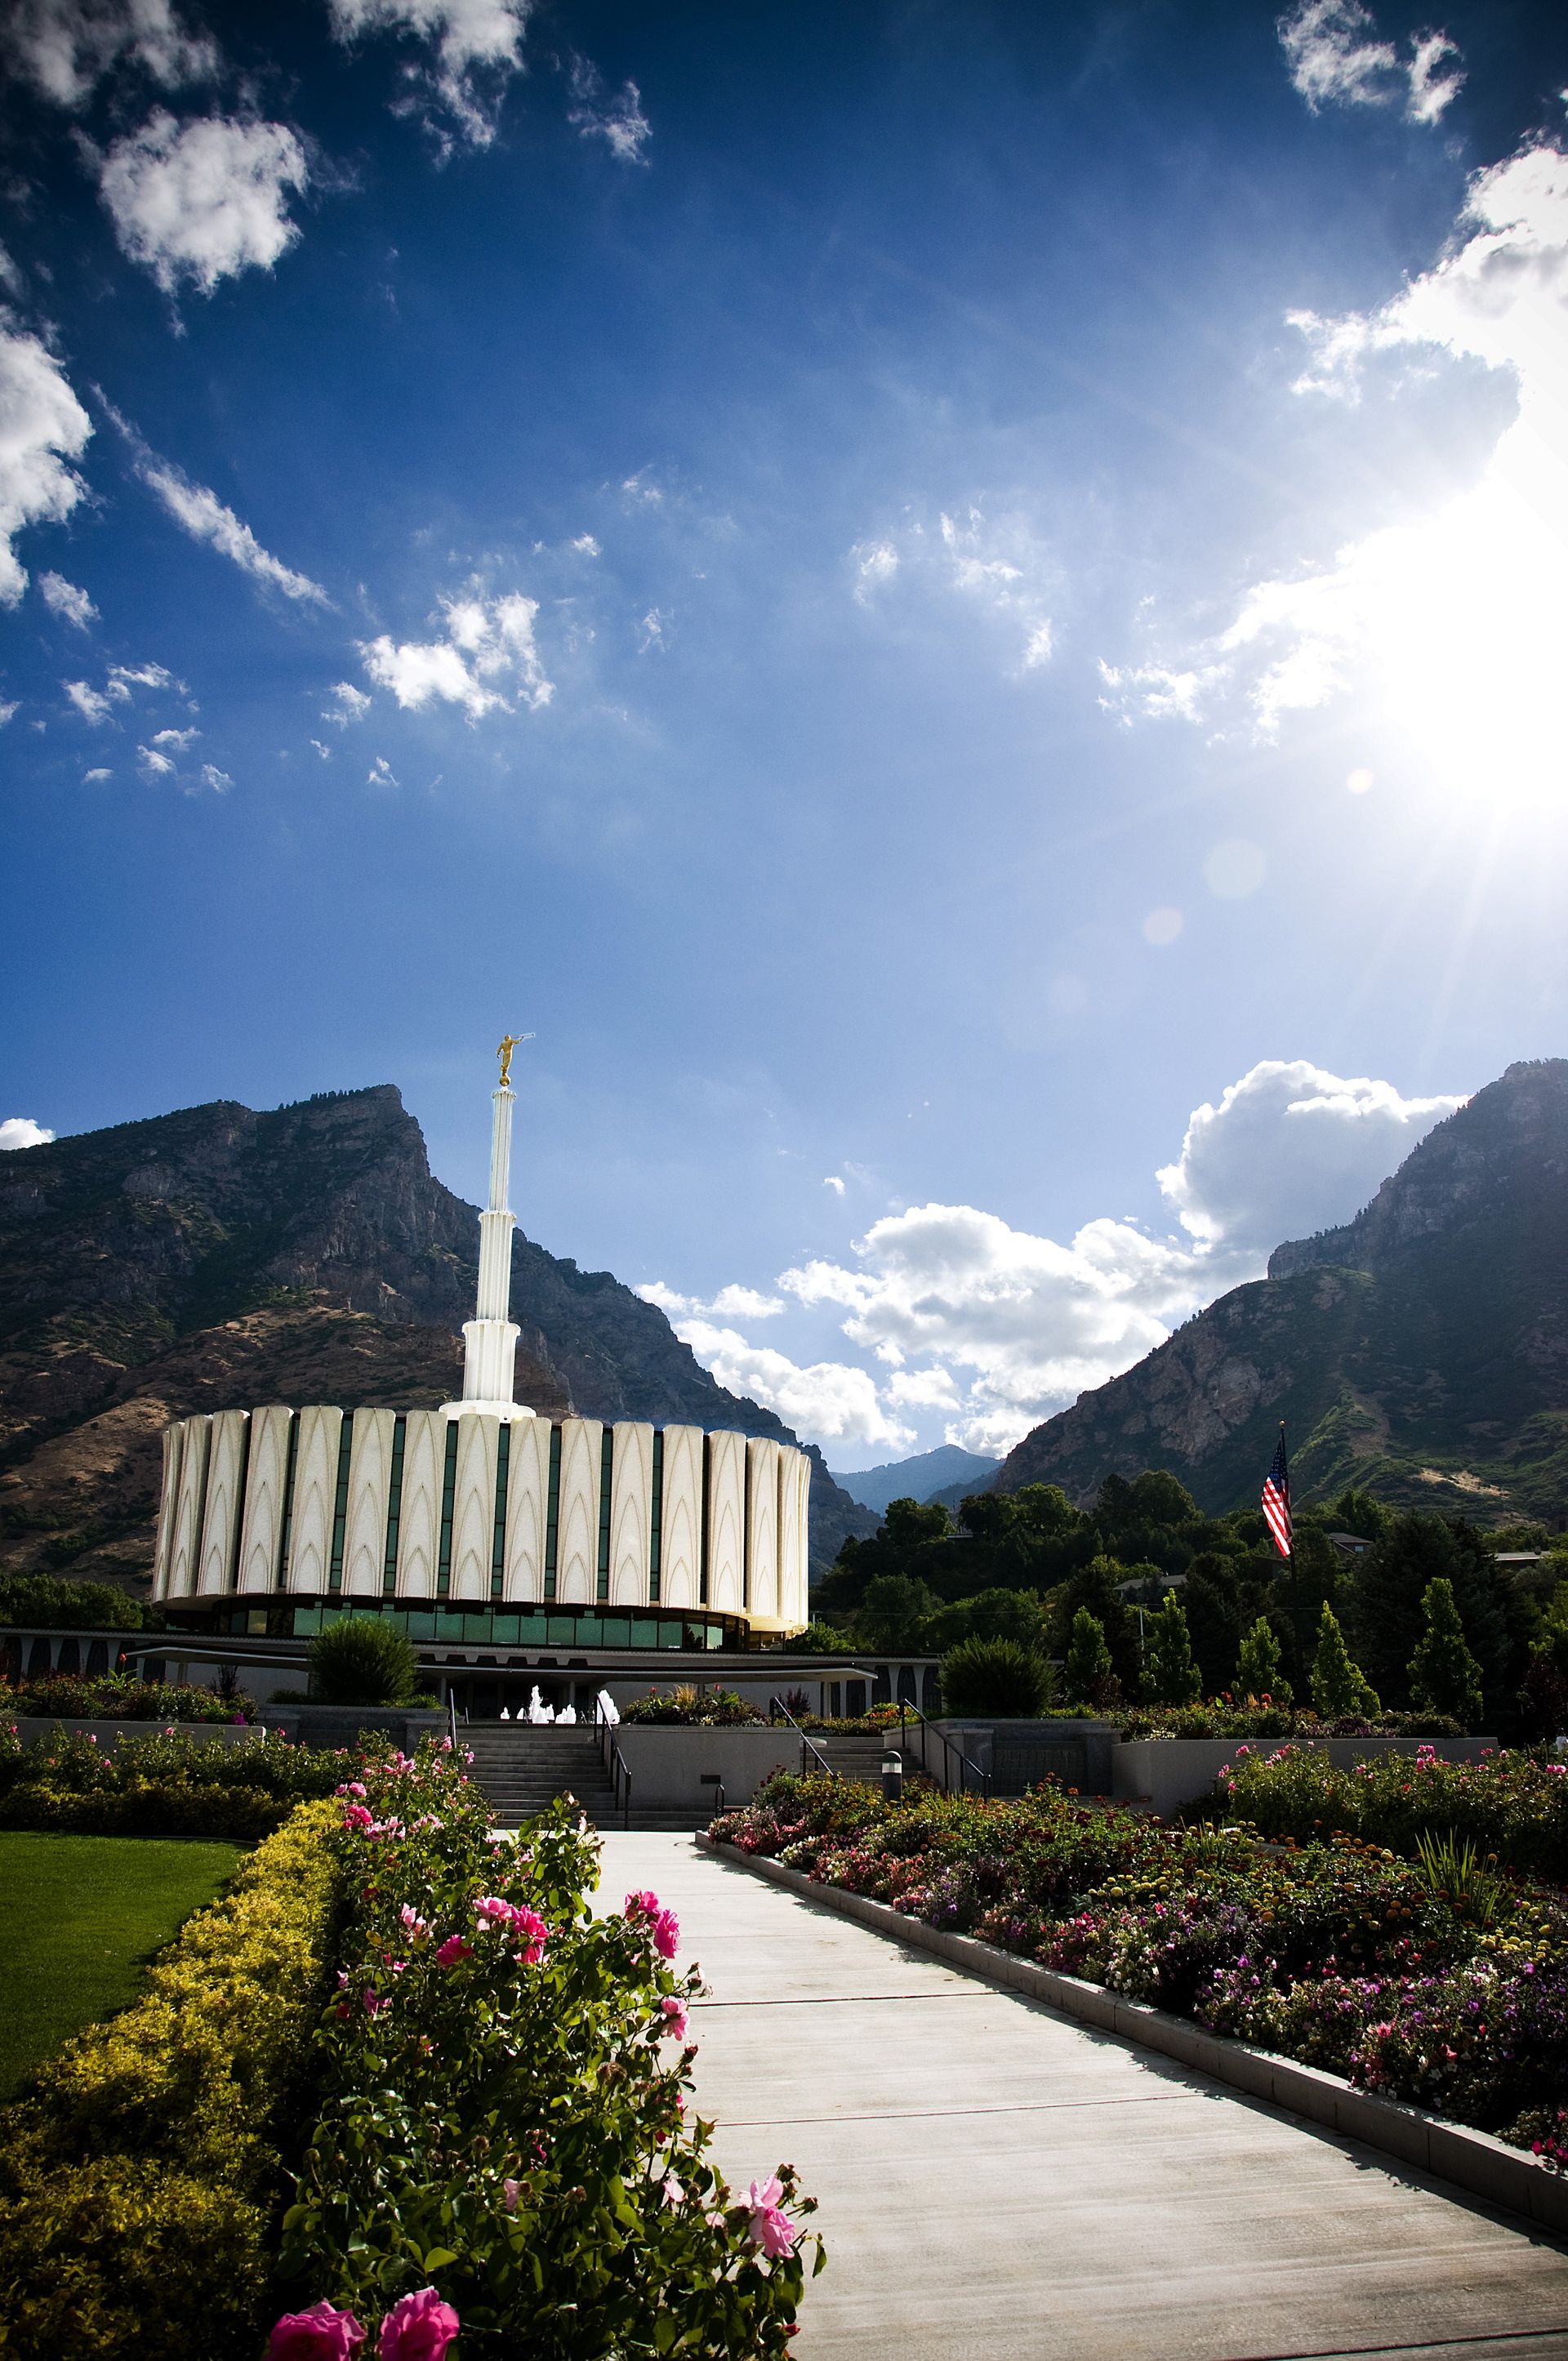 The Provo Utah Temple in the daylight, including scenery.